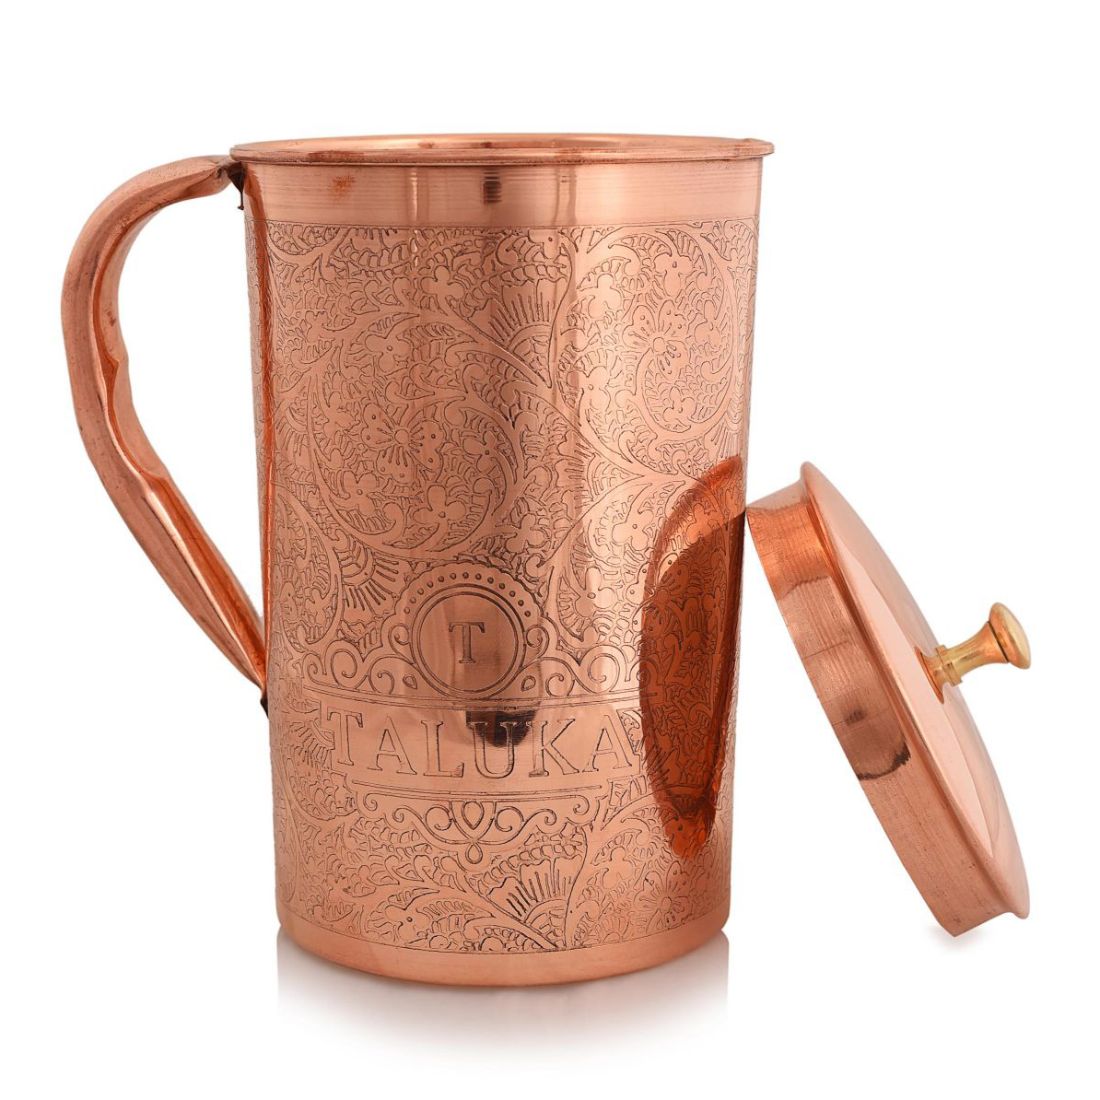 Pure Copper Embossed Water Jug Pitcher with Brass Knob 1500 ML || 2000 ML Water Storage Hotel Home Restaurant